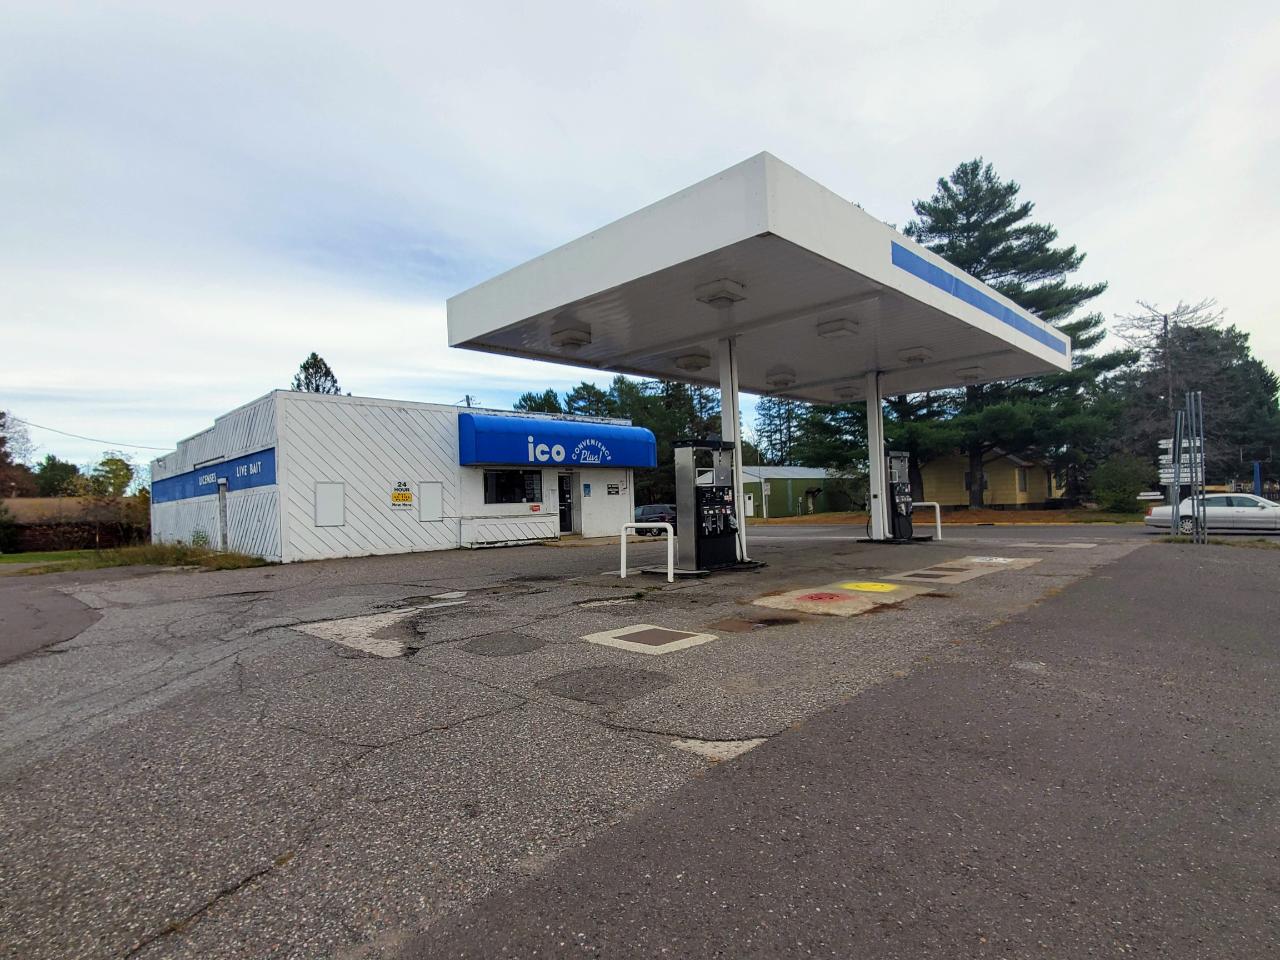 EXCELLENT COMMERCIAL LOCATION!! This property features an 1850 square ft commercial building with gas pumps and canopy. It has great visibility with road frontage along both HWY 51 and CTH J in downtown Mercer and is located just 50 ft from the snowmobile trail! WI DOT estimates the daily traffic is between 3,400-3,900. Make your business dreams a reality today! Property sold "As is" / All measurements are approximate and need to be verified by the buyer